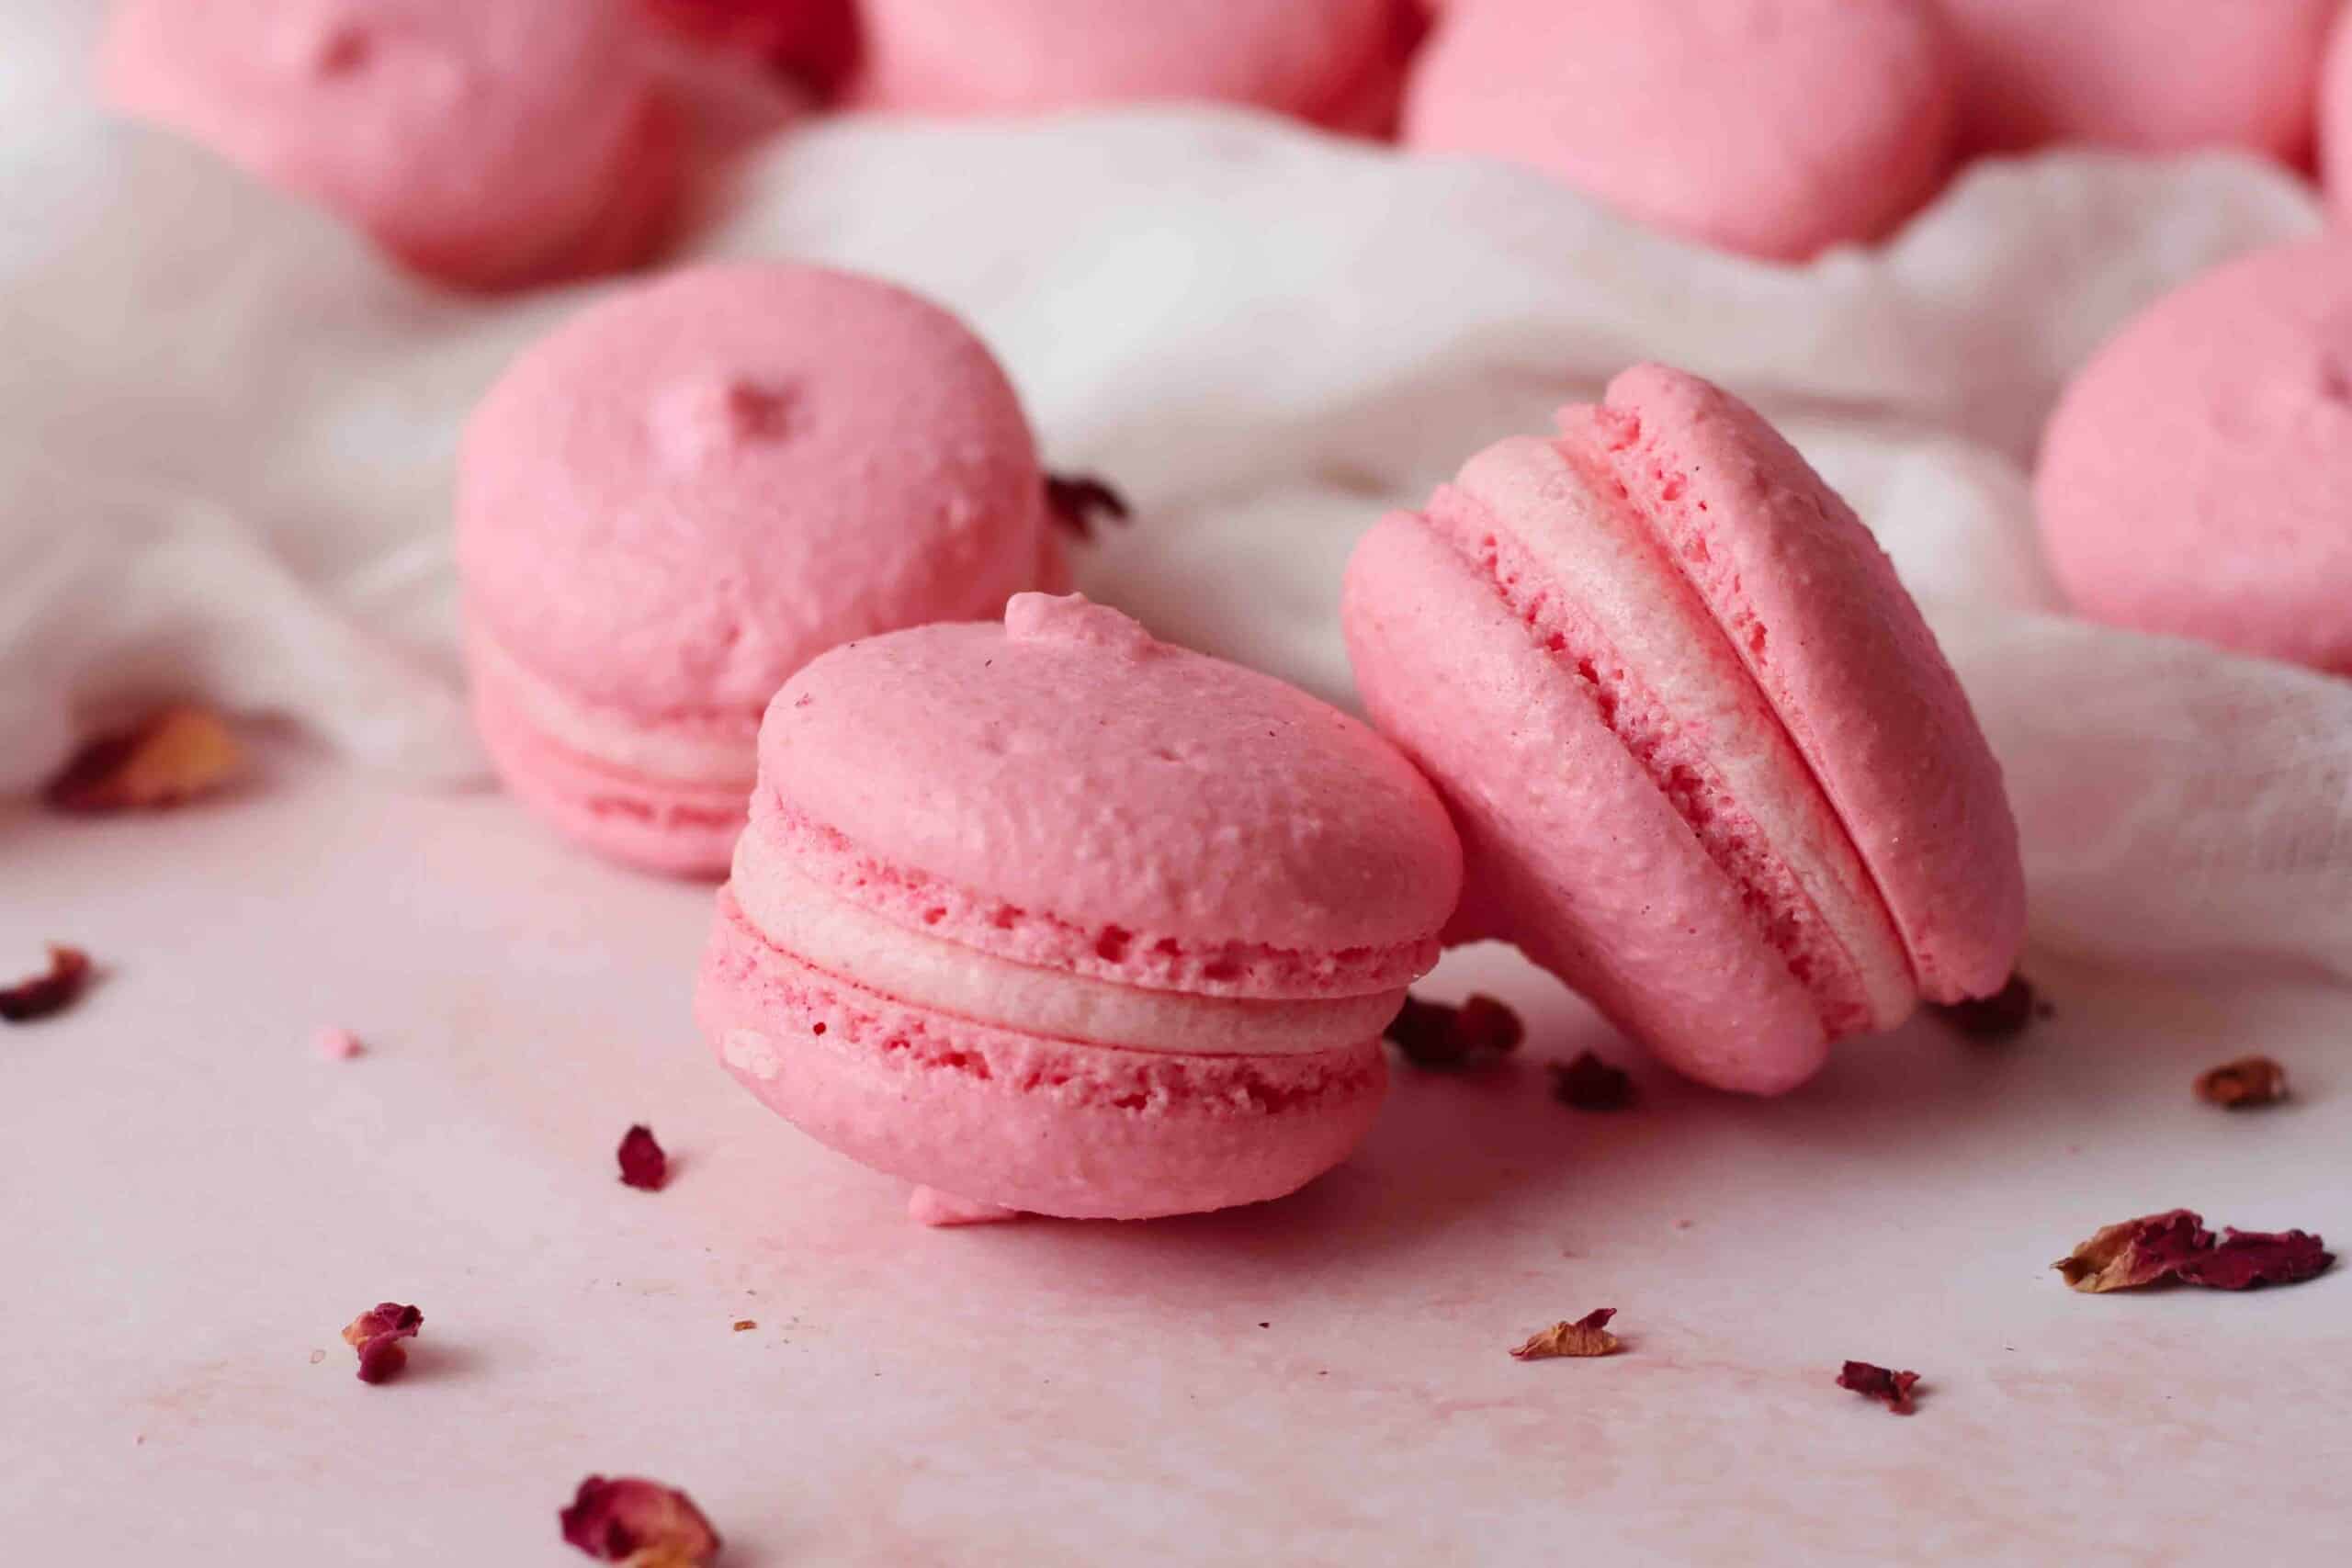 Rose Macarons next to each other along with some rose petals.